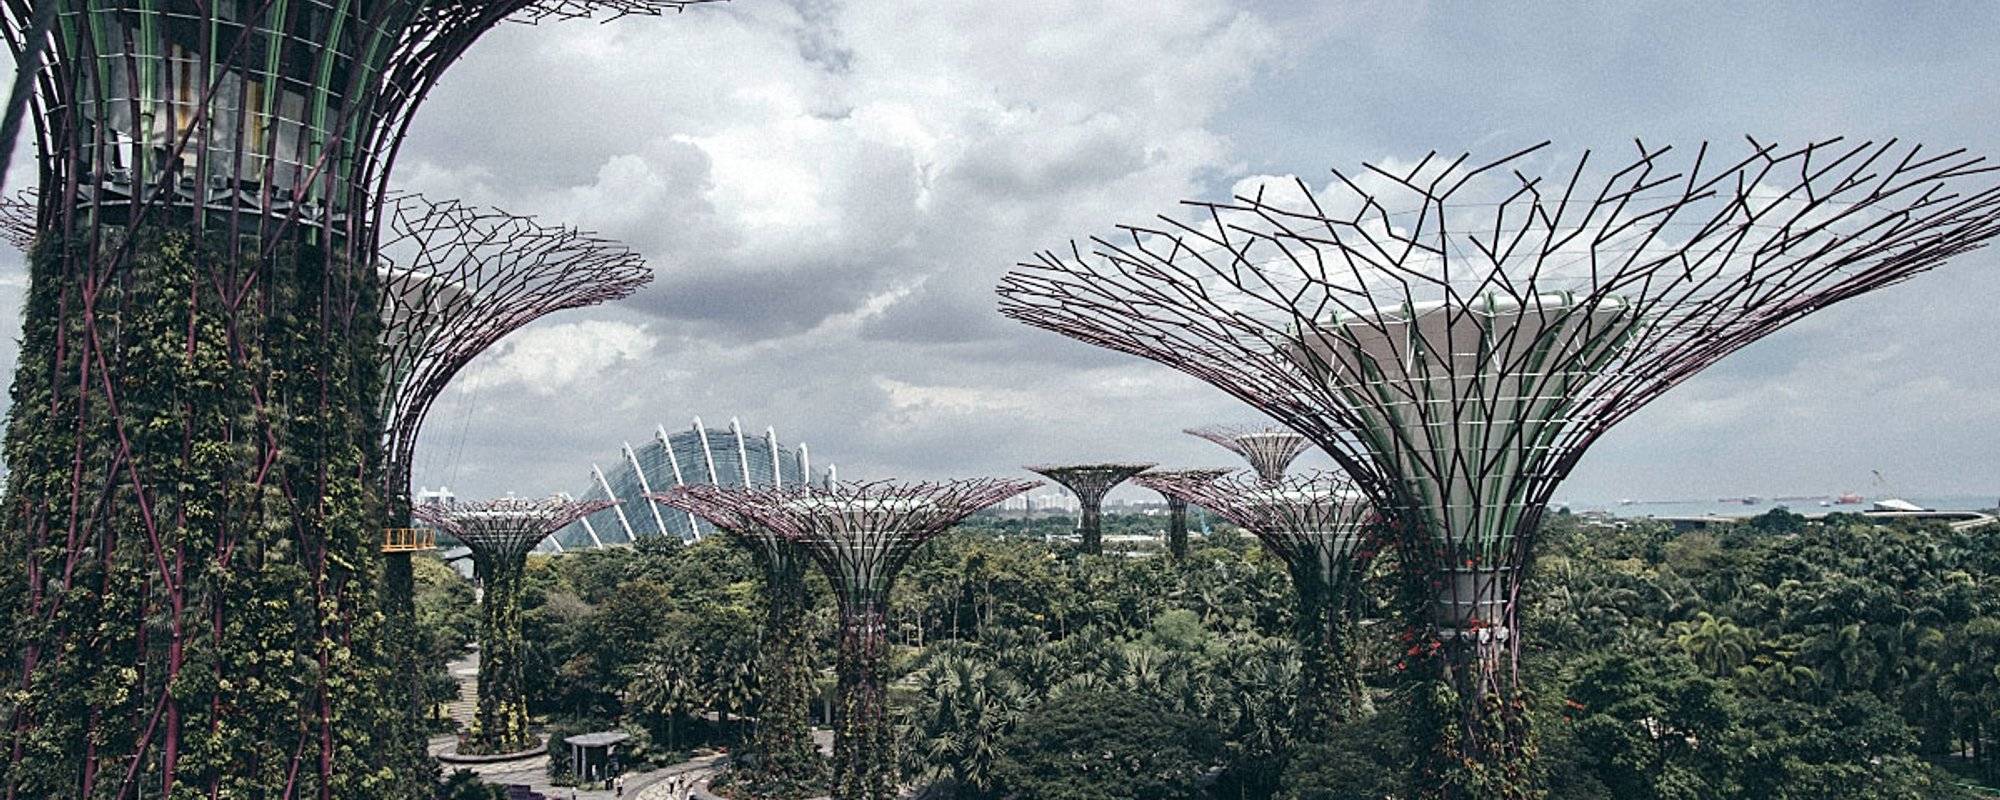 WHY YOU SHOULD VISIT CLOUD FOREST, FLOWER DOME AND THE OCBC SKYWAY IN SINGAPORE